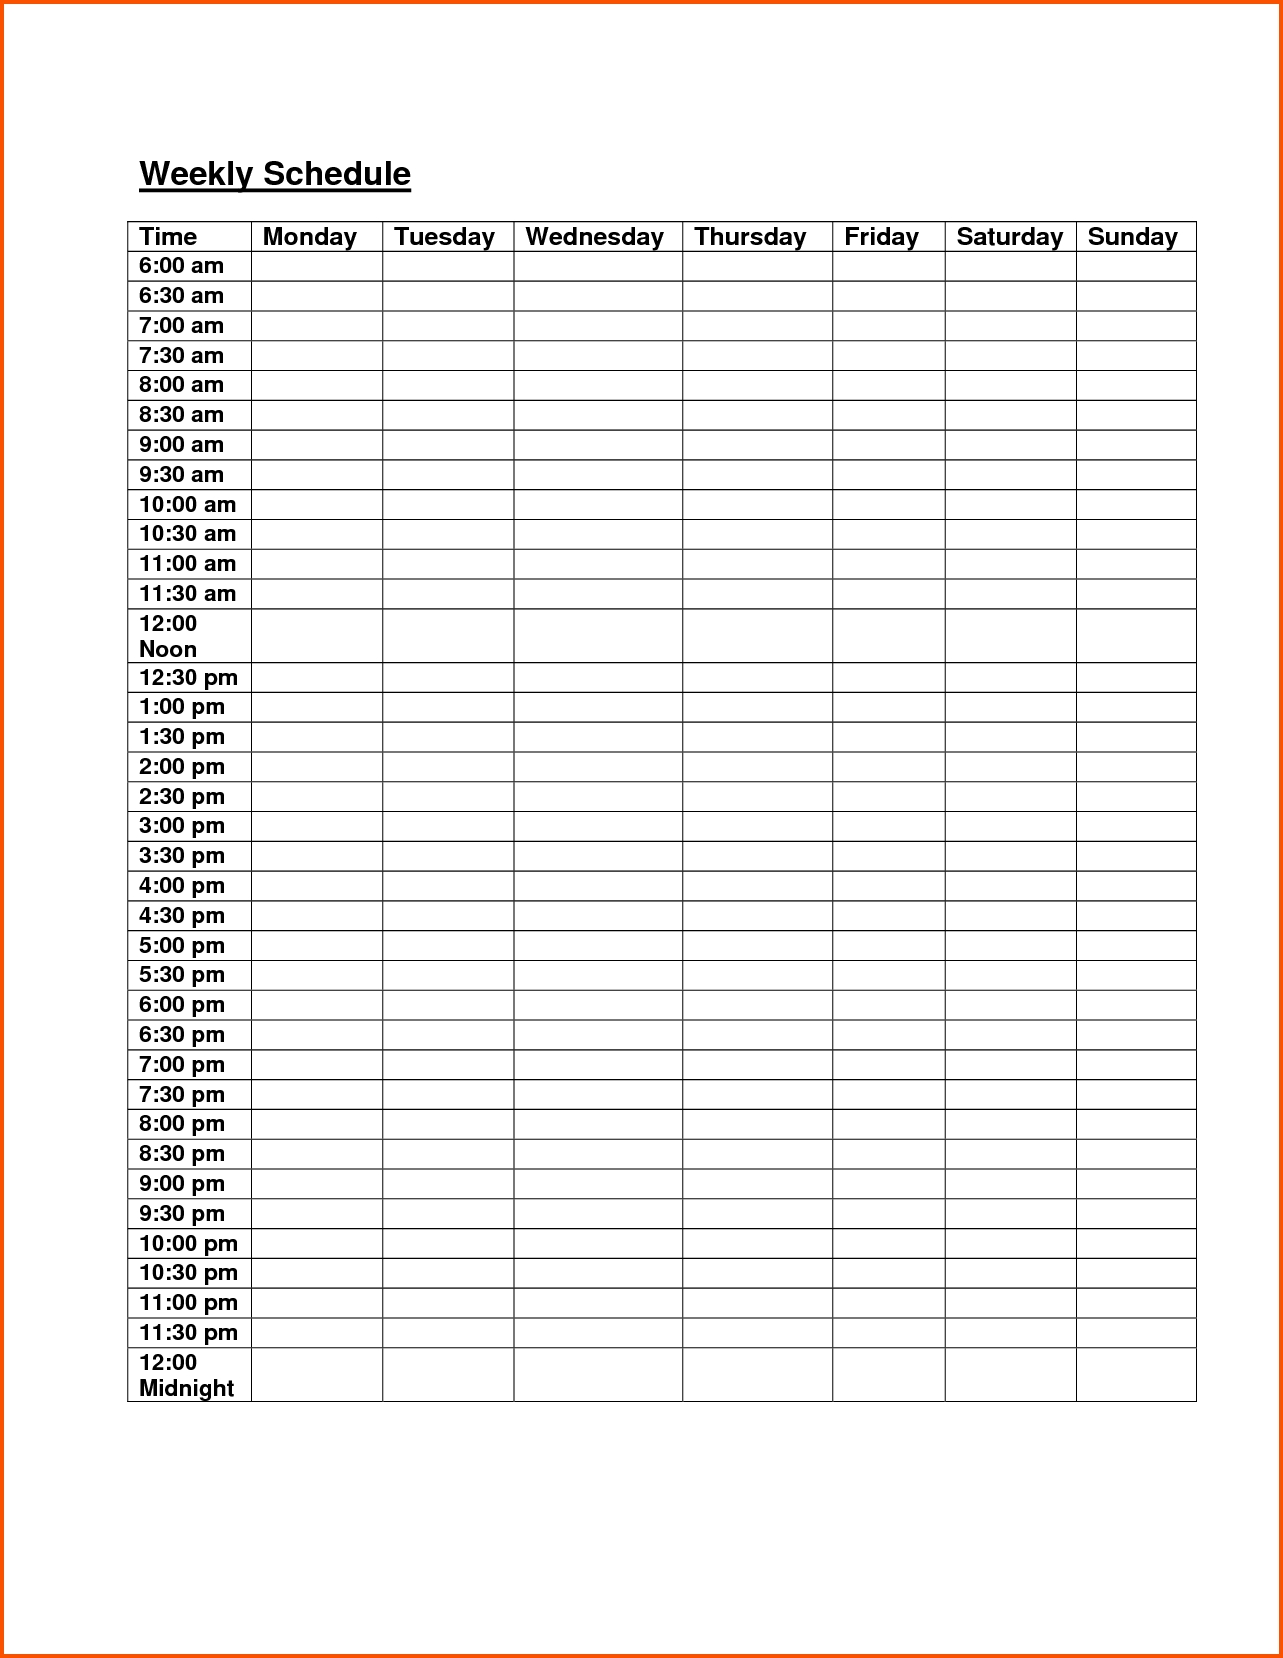 Free Weekly Class Schedule Template Excel #1 | Those Who Can, Teach intended for Blank Schedule Sheet With Times